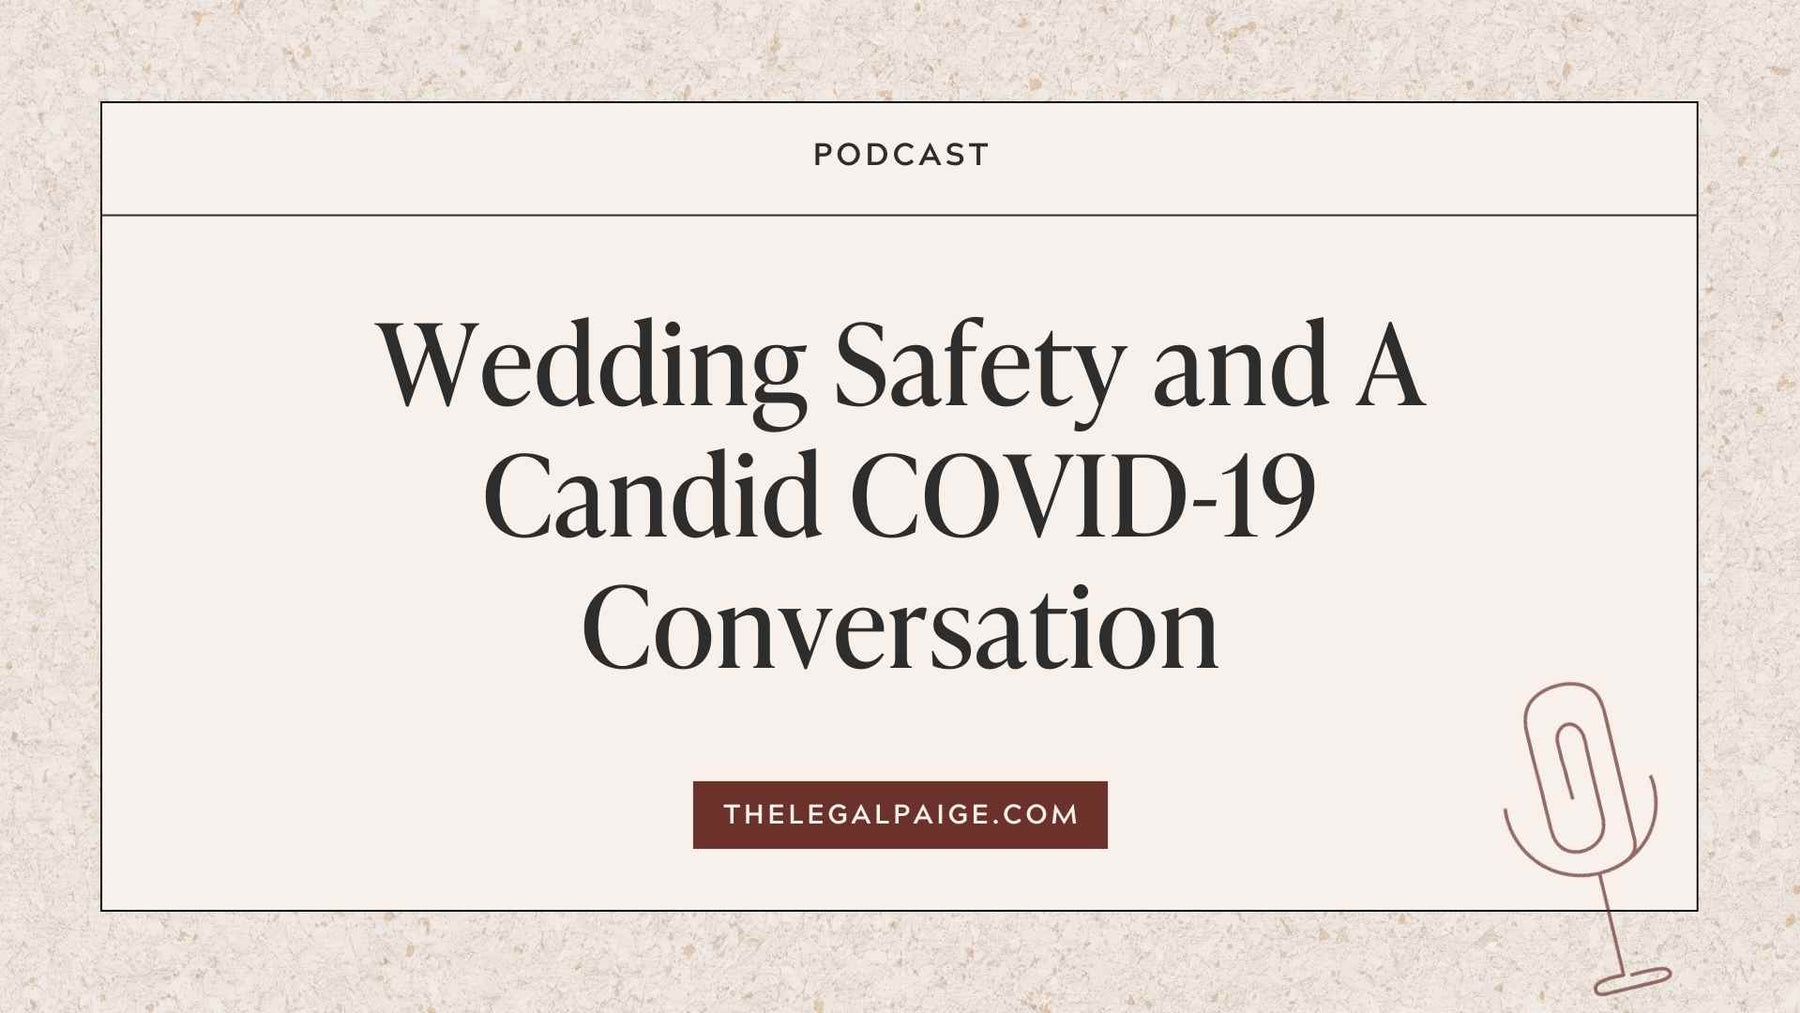 Episode 62: Wedding Safety and A Candid COVID-19 Conversation